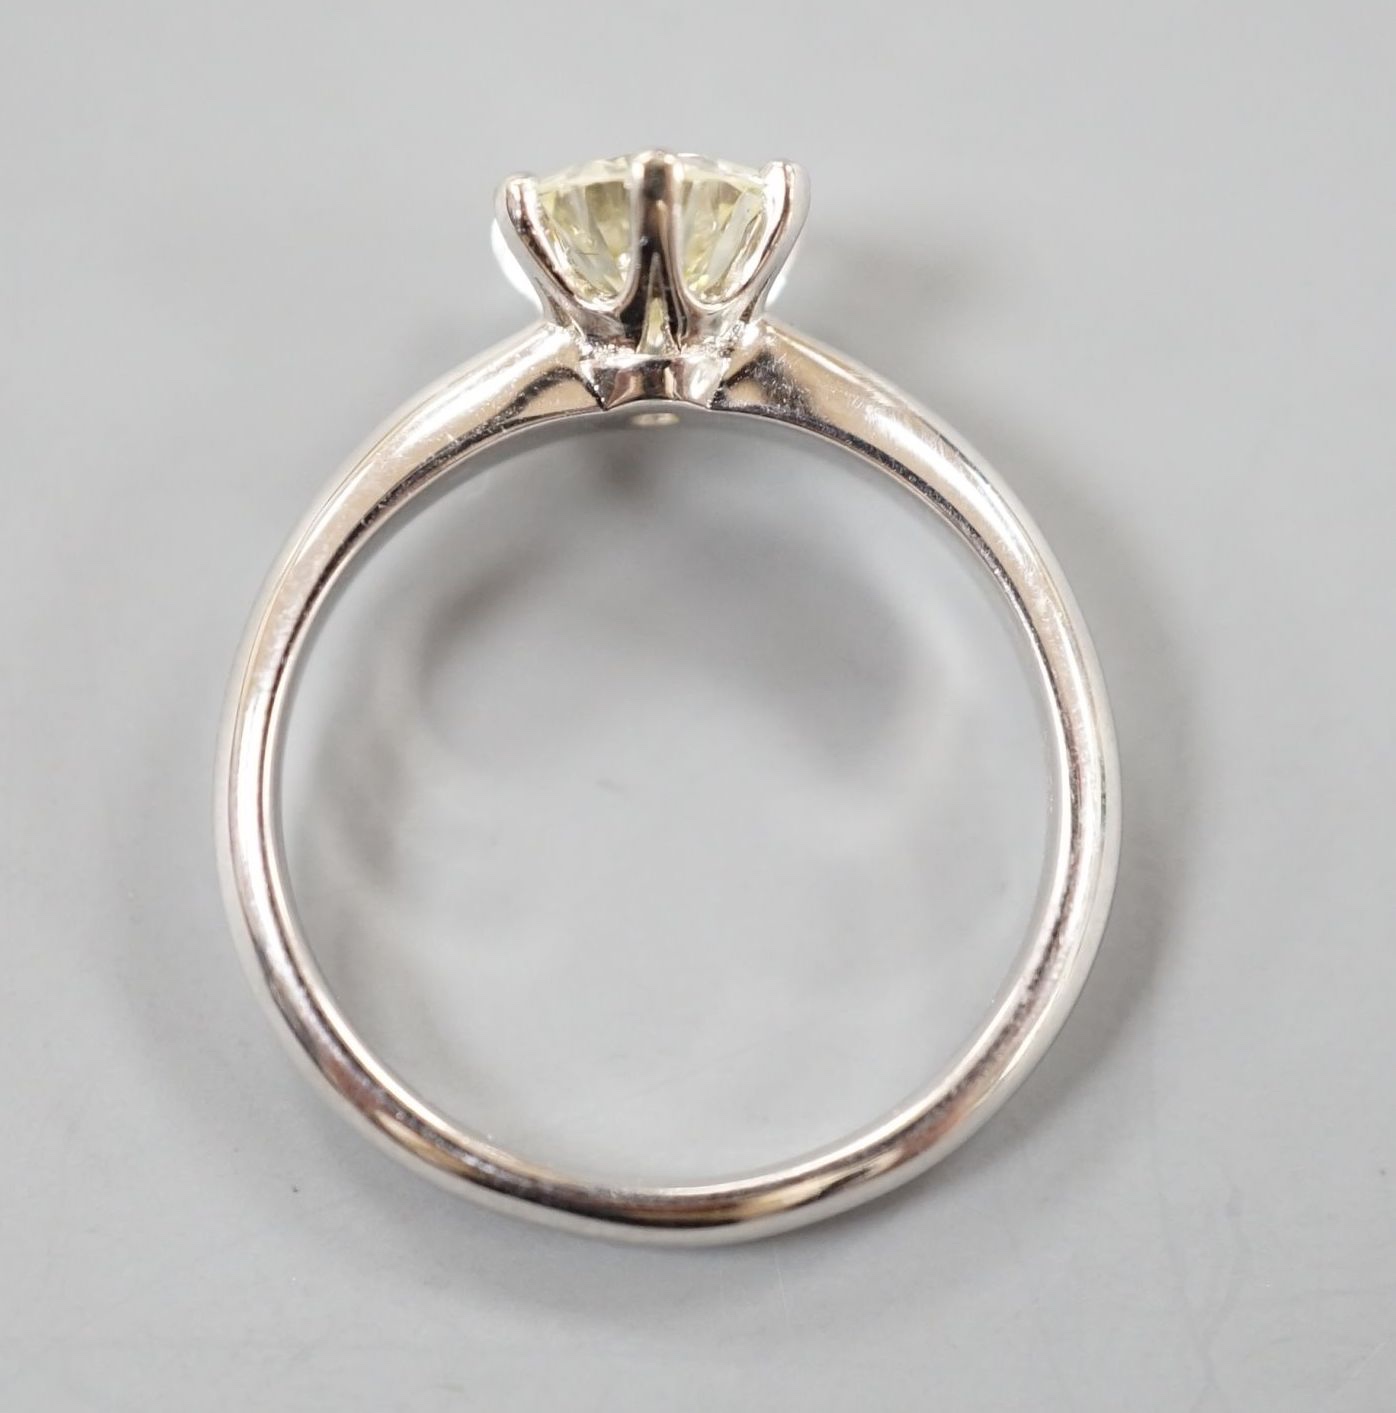 A modern 18k white metal and solitaire diamond set ring, size M, gross weight 3.6 grams